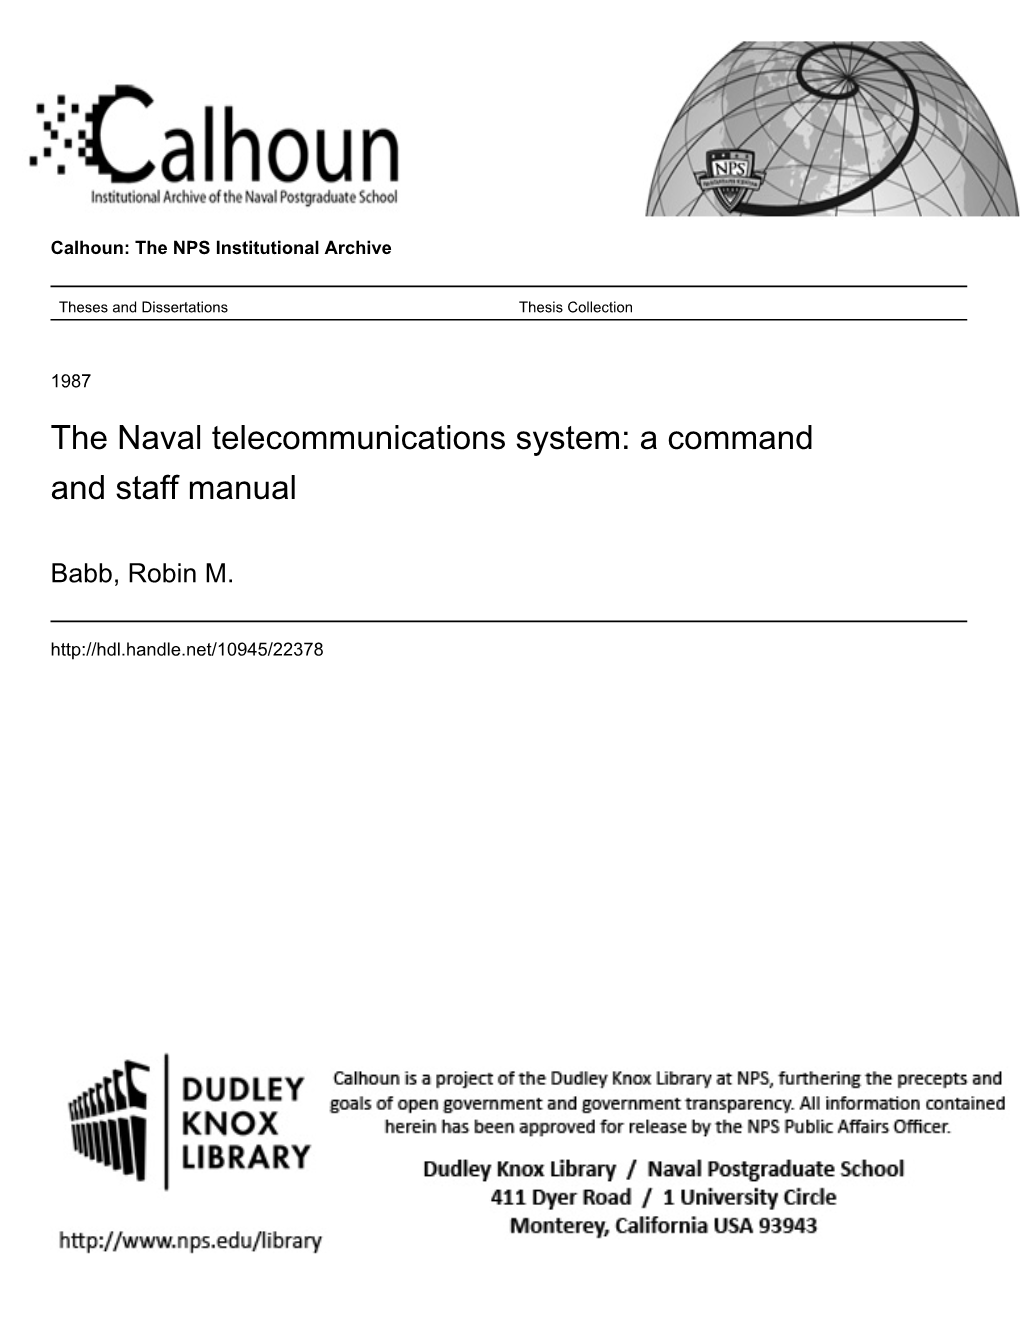 The Naval Telecommunications System: a Command and Staff Manual